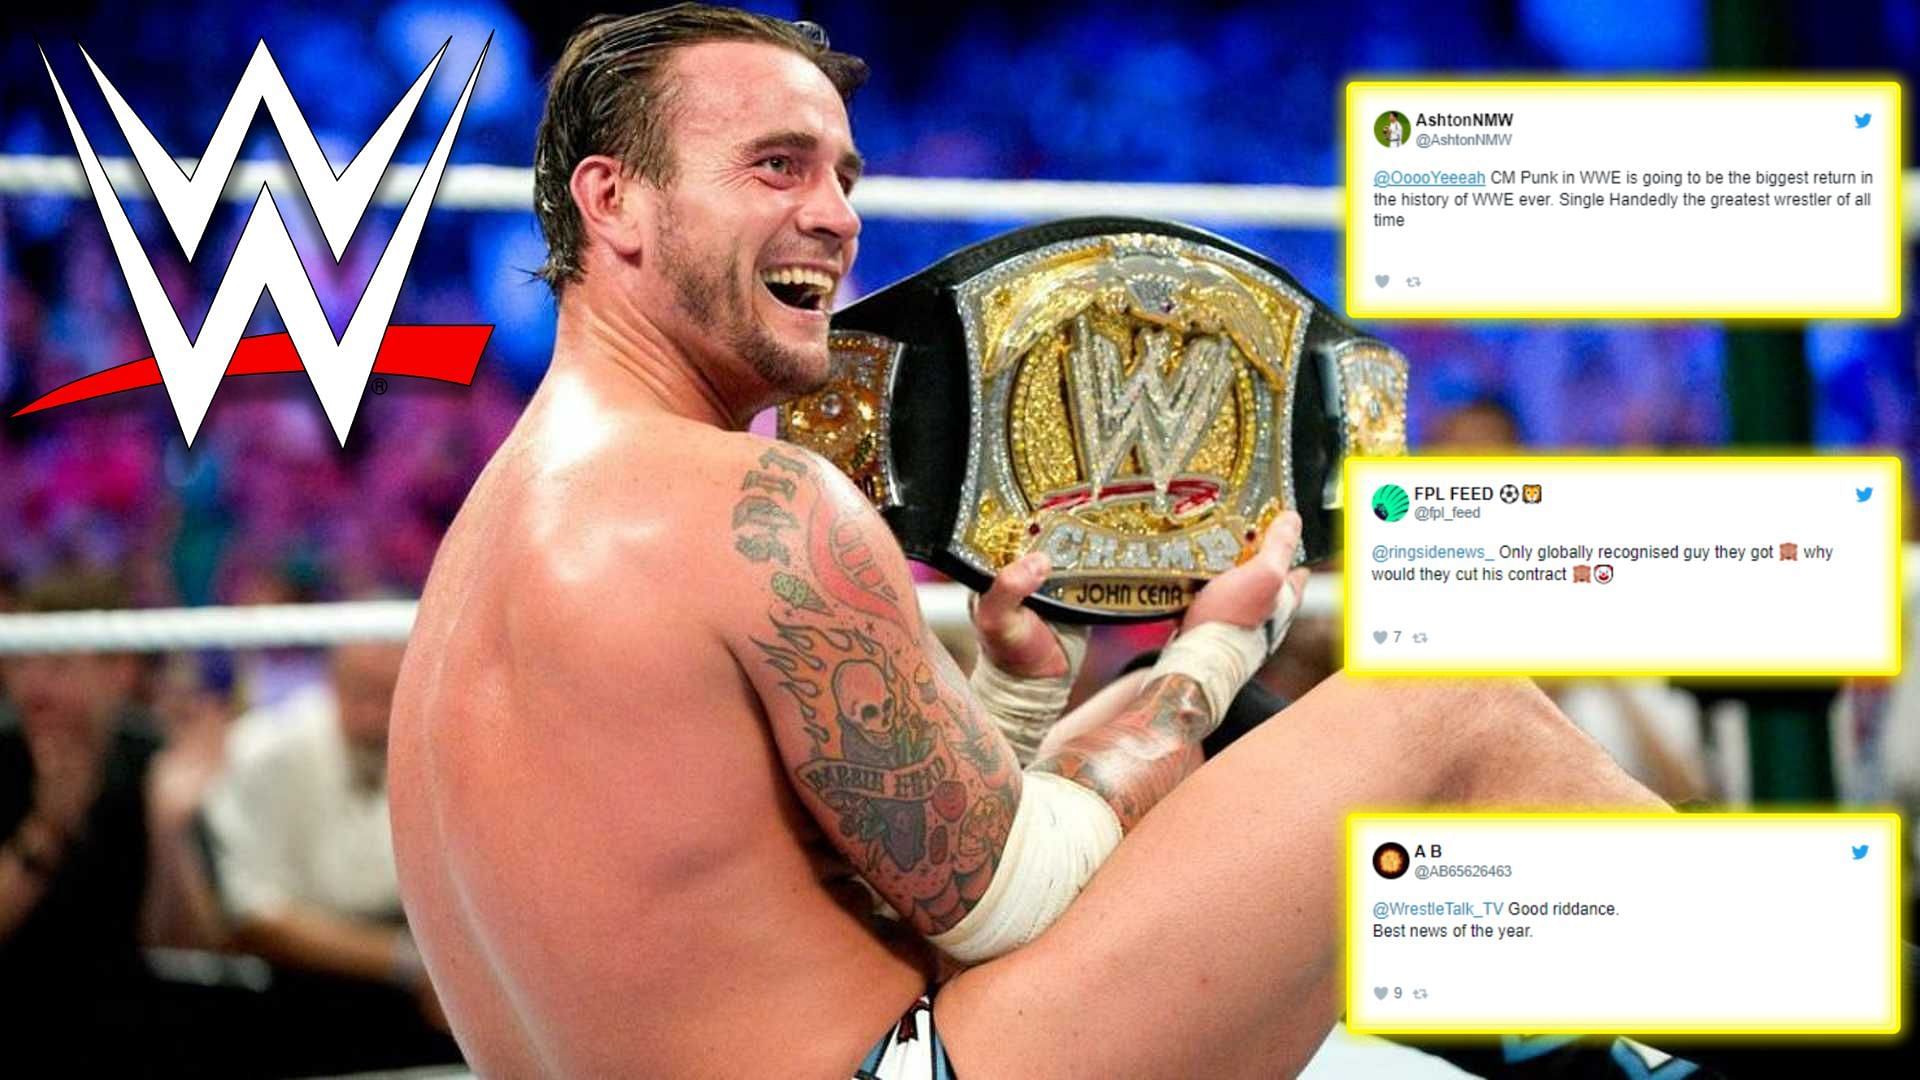 If the rumors are true, could CM Punk be WWE bound?